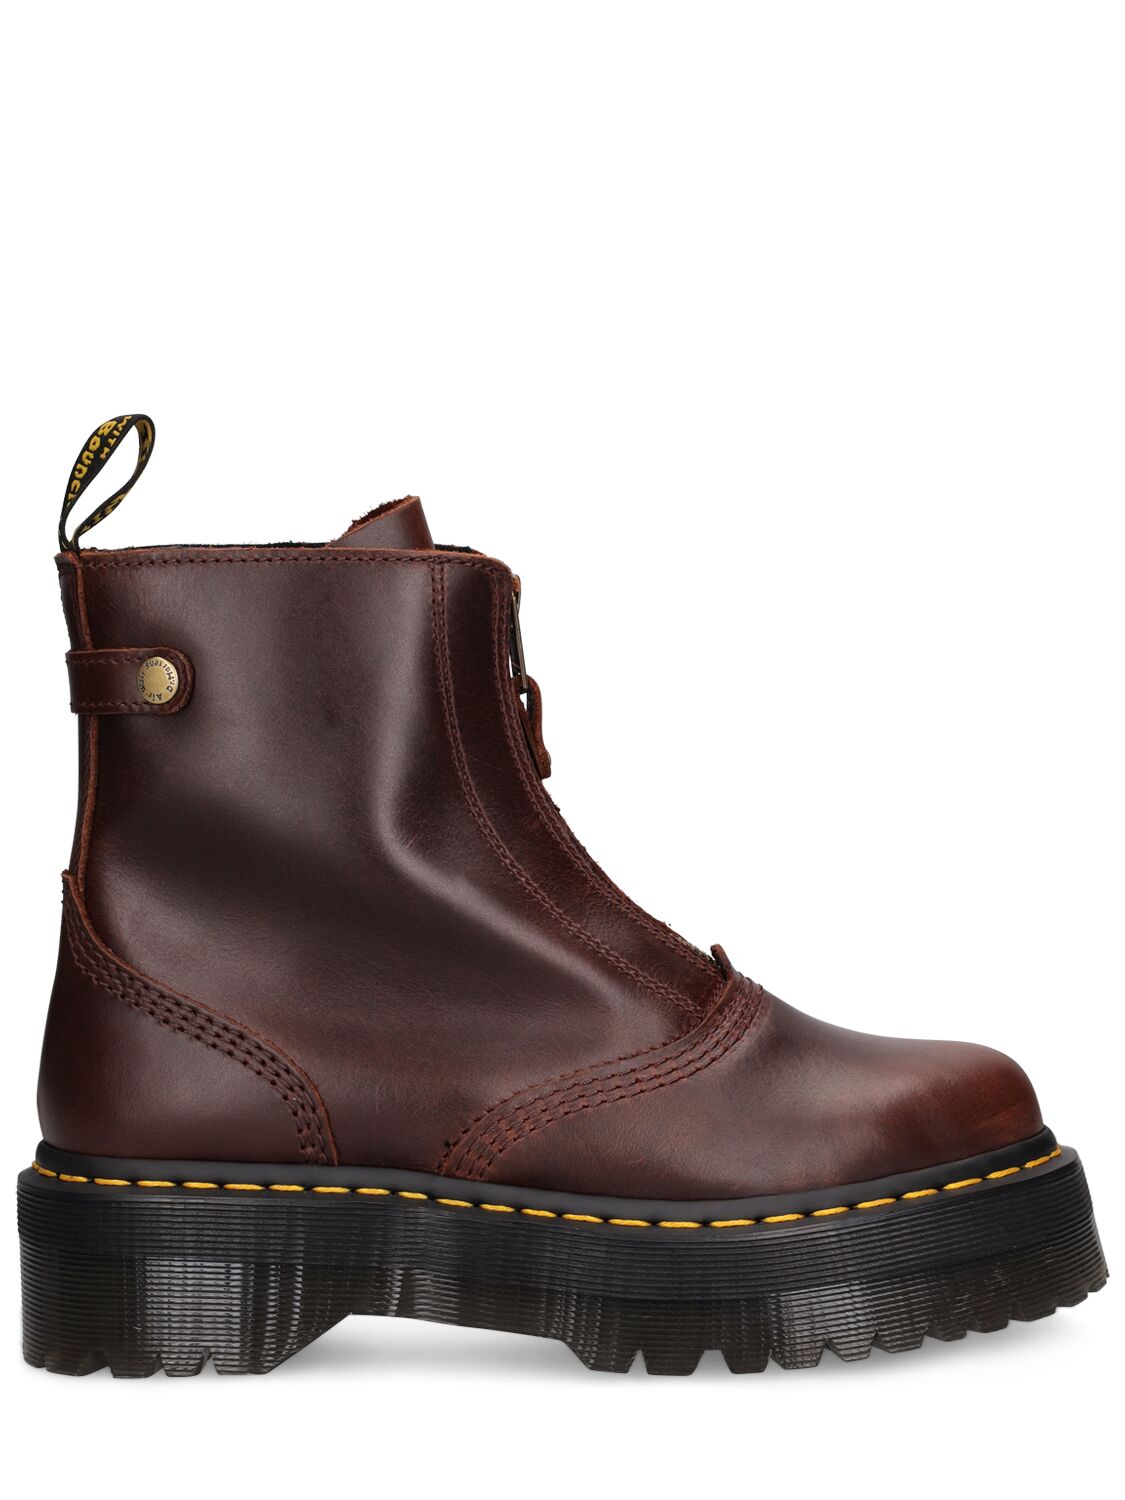 Dr. Martens 40mm Jetta Classic Ankle Boots